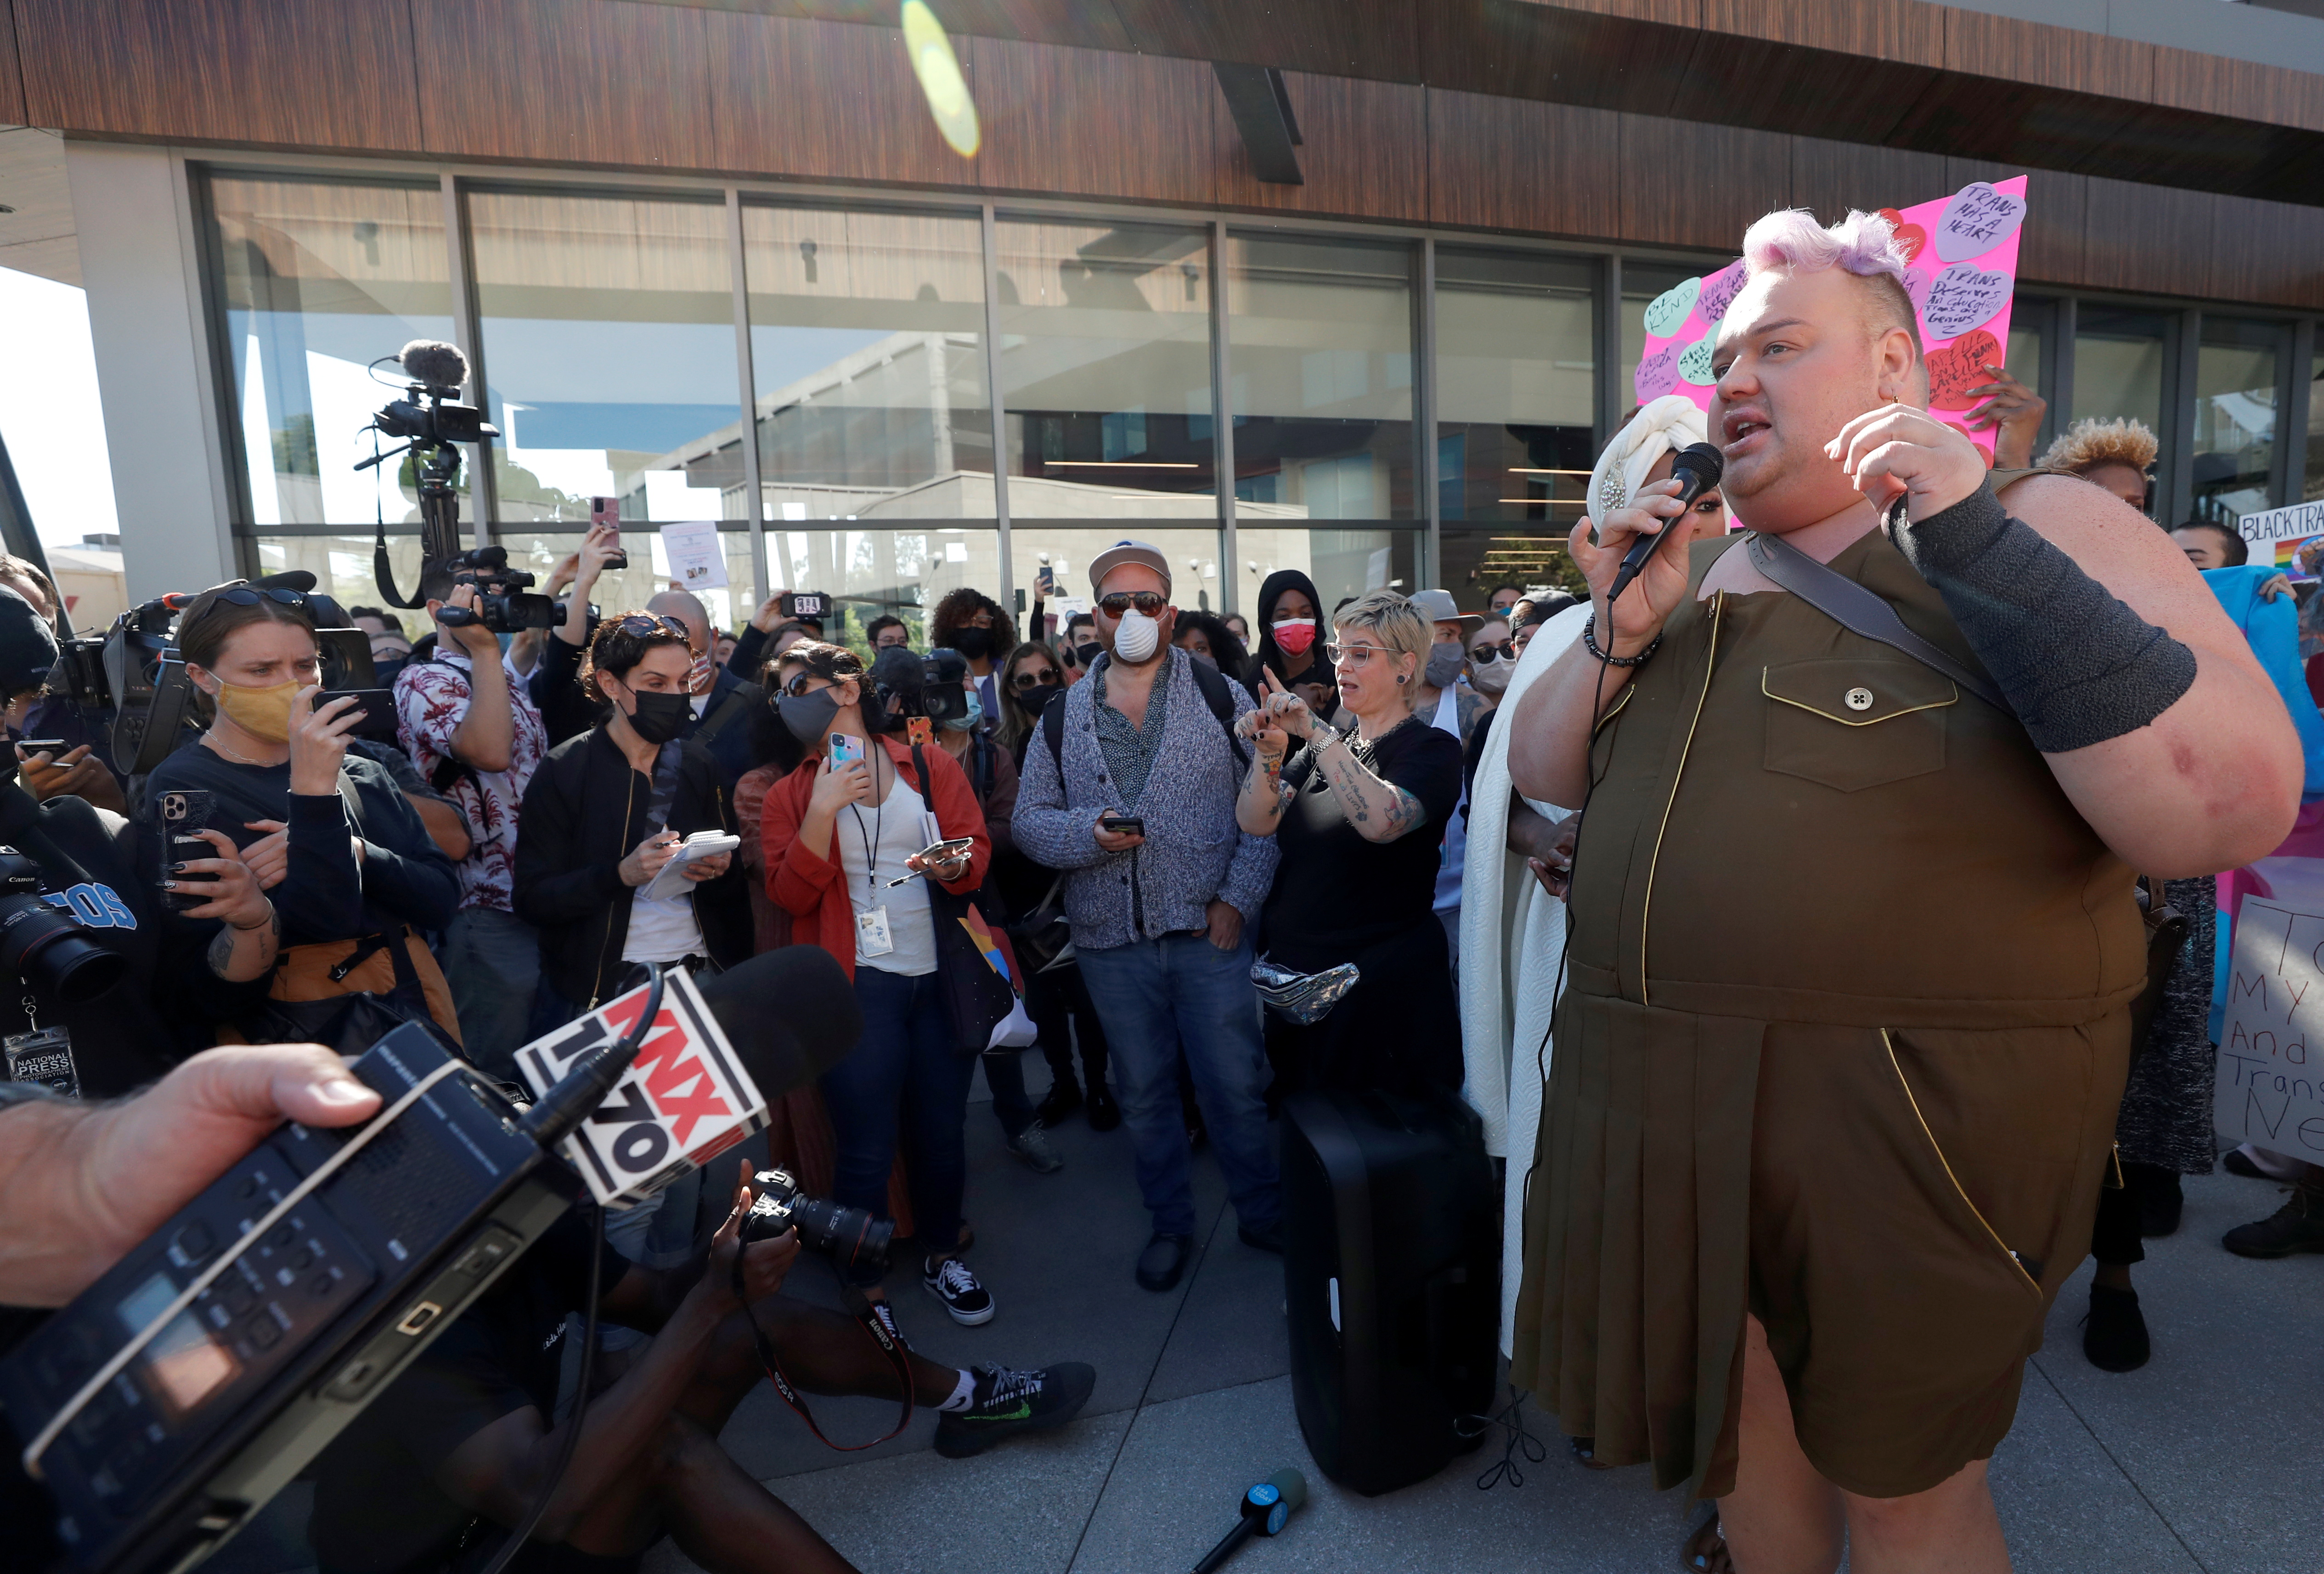 Drag queen Eureka O'Hara speaks during a rally in support of the Netflix transgender employee walkout ?Stand Up in Solidarity? to protest the streaming of comedian Dave Chappelle?s new comedy special, in Los Angeles, California, U.S. October 20 2021. REUTERS/Mario Anzuoni